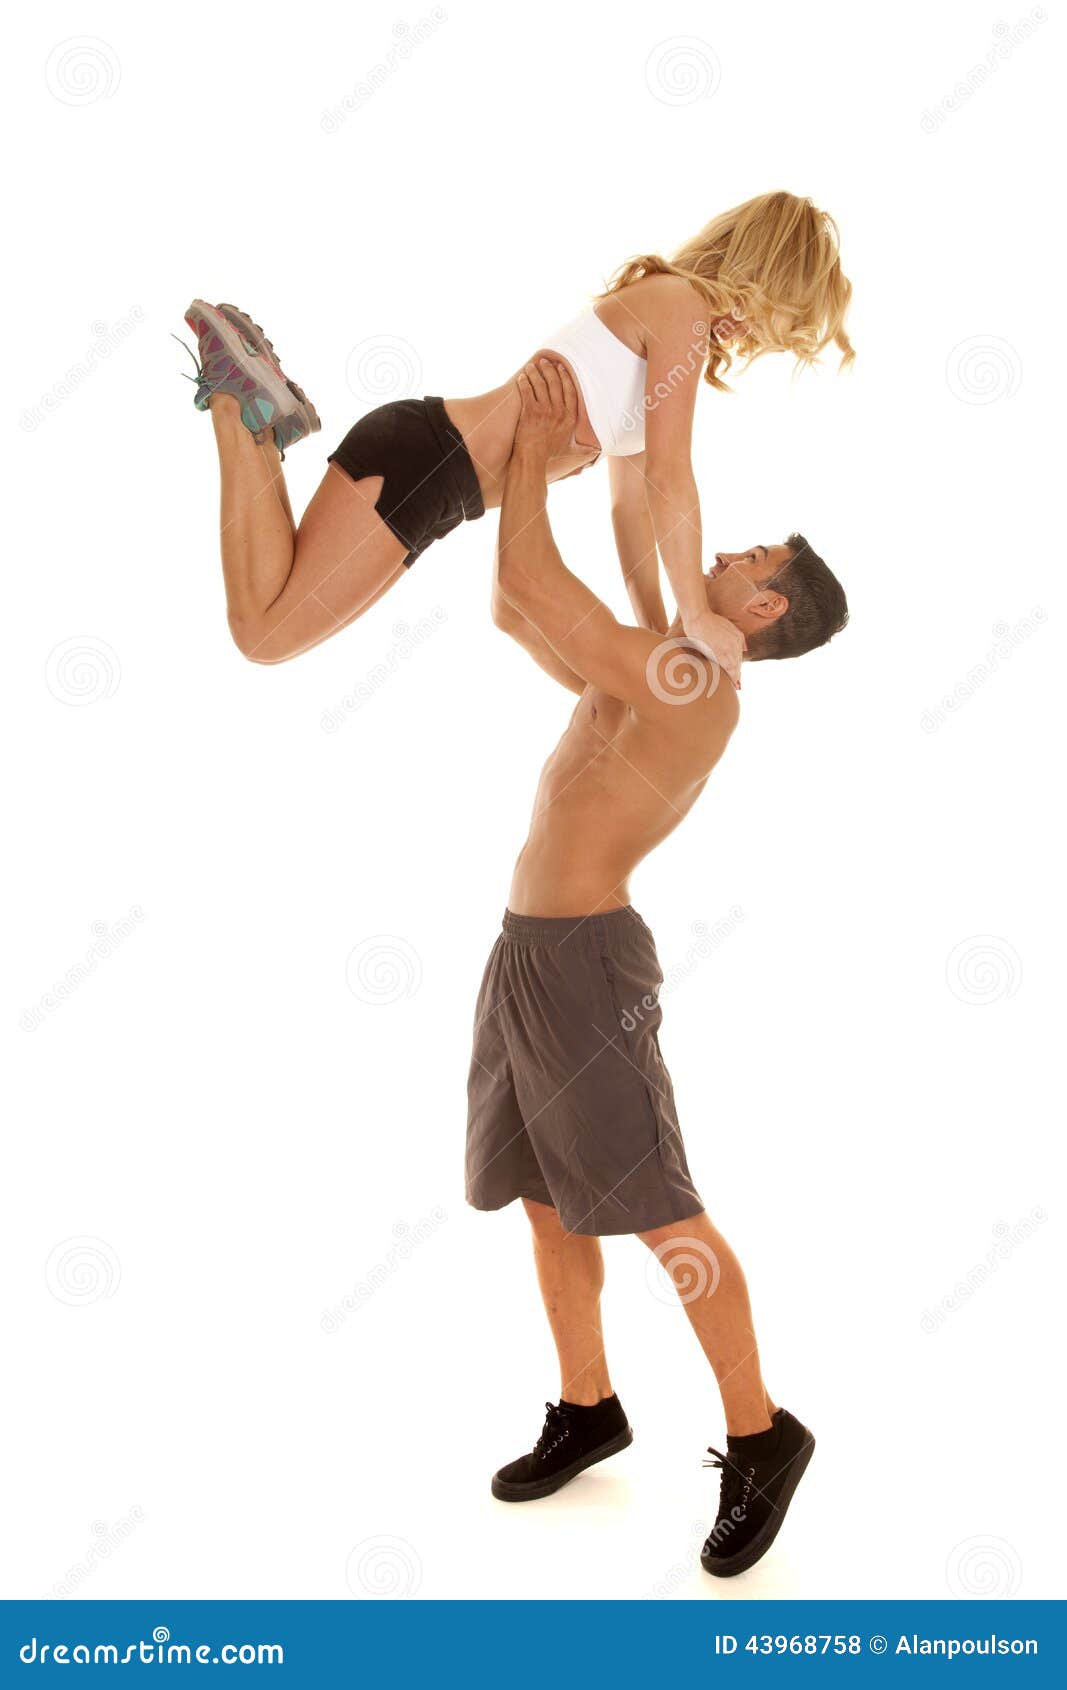 Fitness Man Hold Woman Up By Waist Facing Each Other Stock Photo ... picture